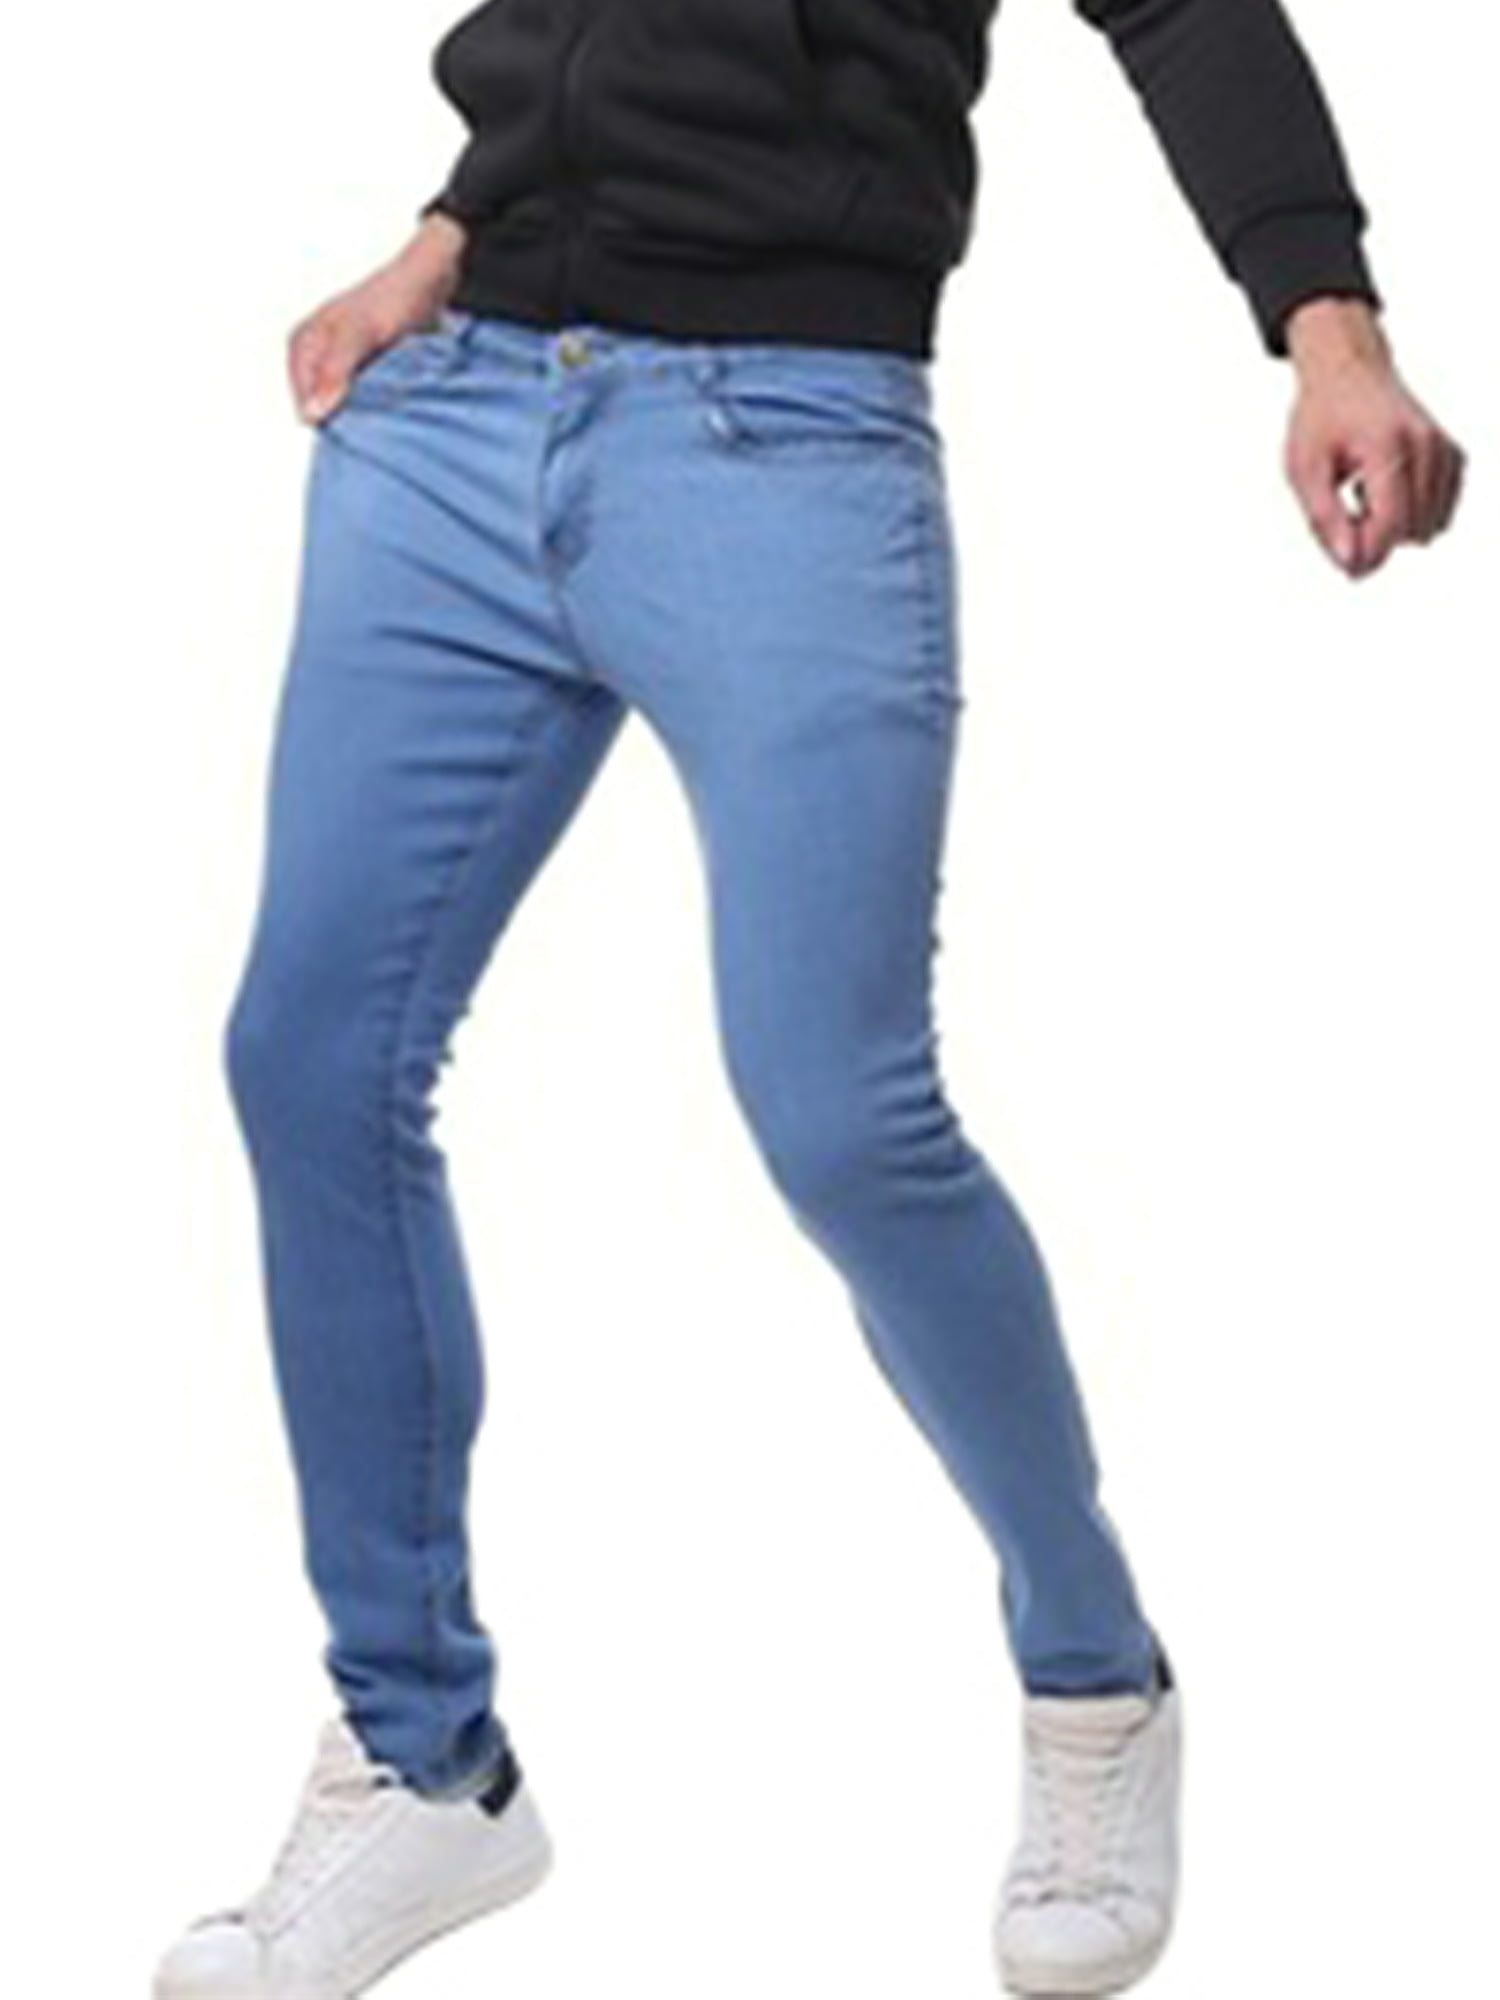 Denim Herren Jeans Hose Fashion Casual Solid Jeans Slim Straight Basic Trousers